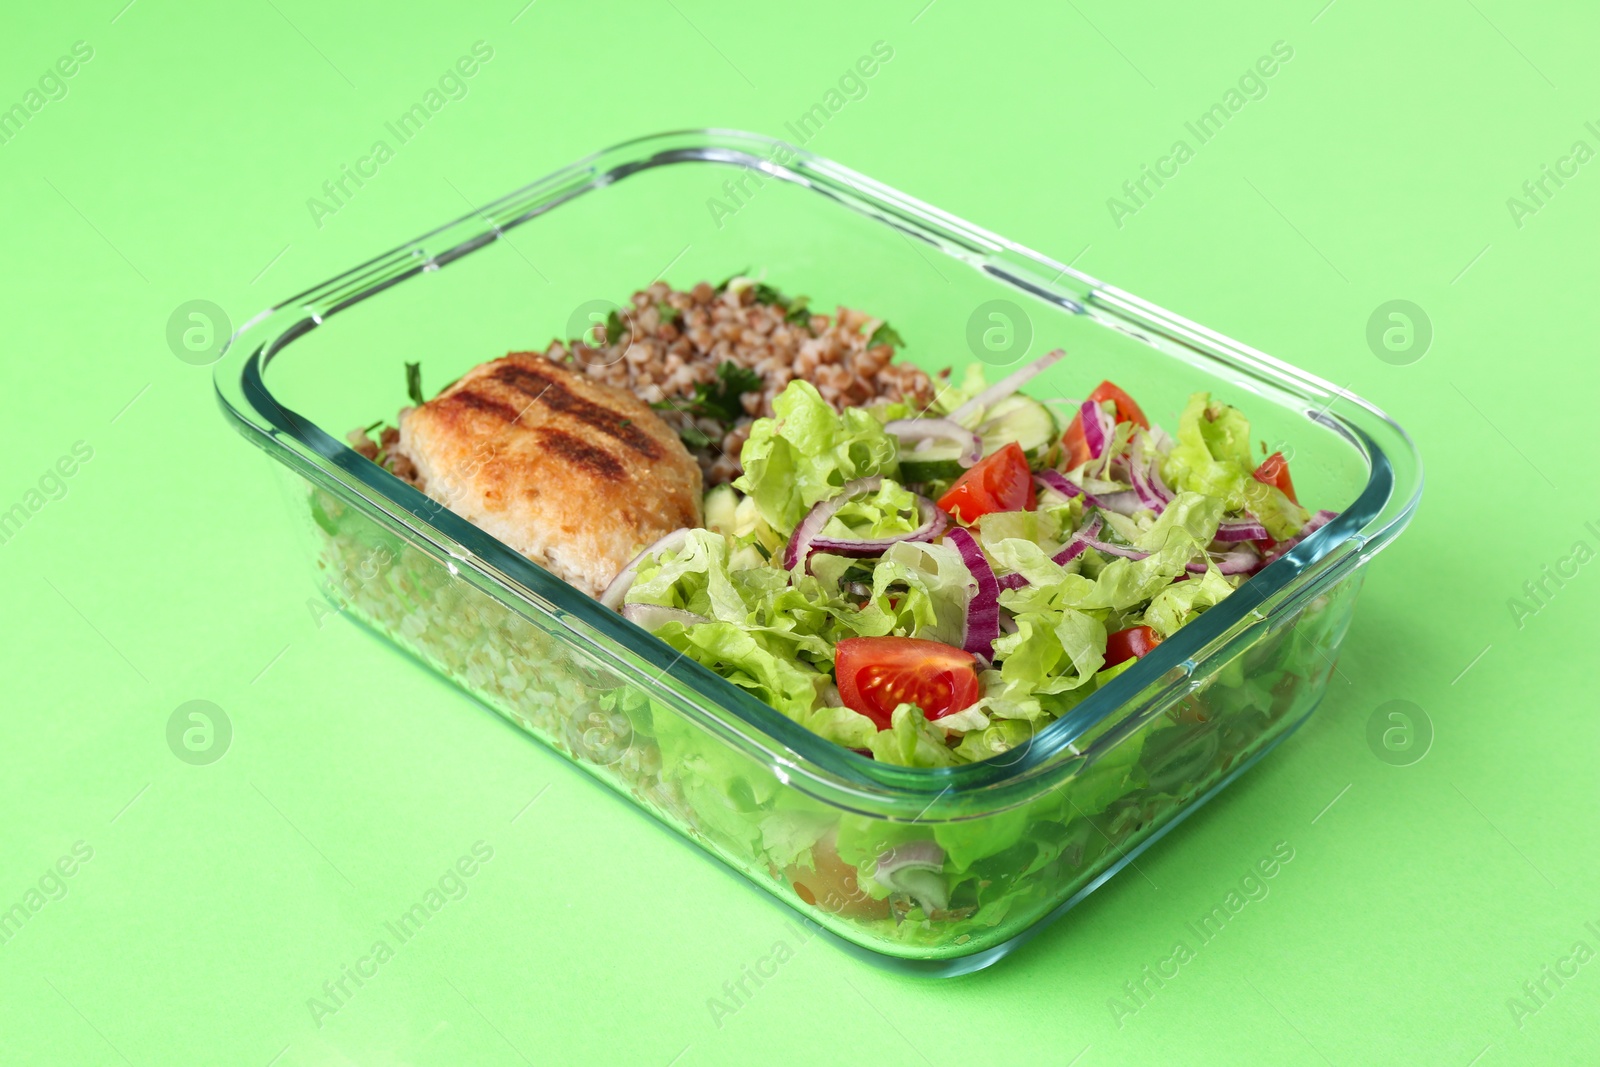 Photo of Healthy meal. Fresh salad, cutlet and buckwheat in glass container on green background